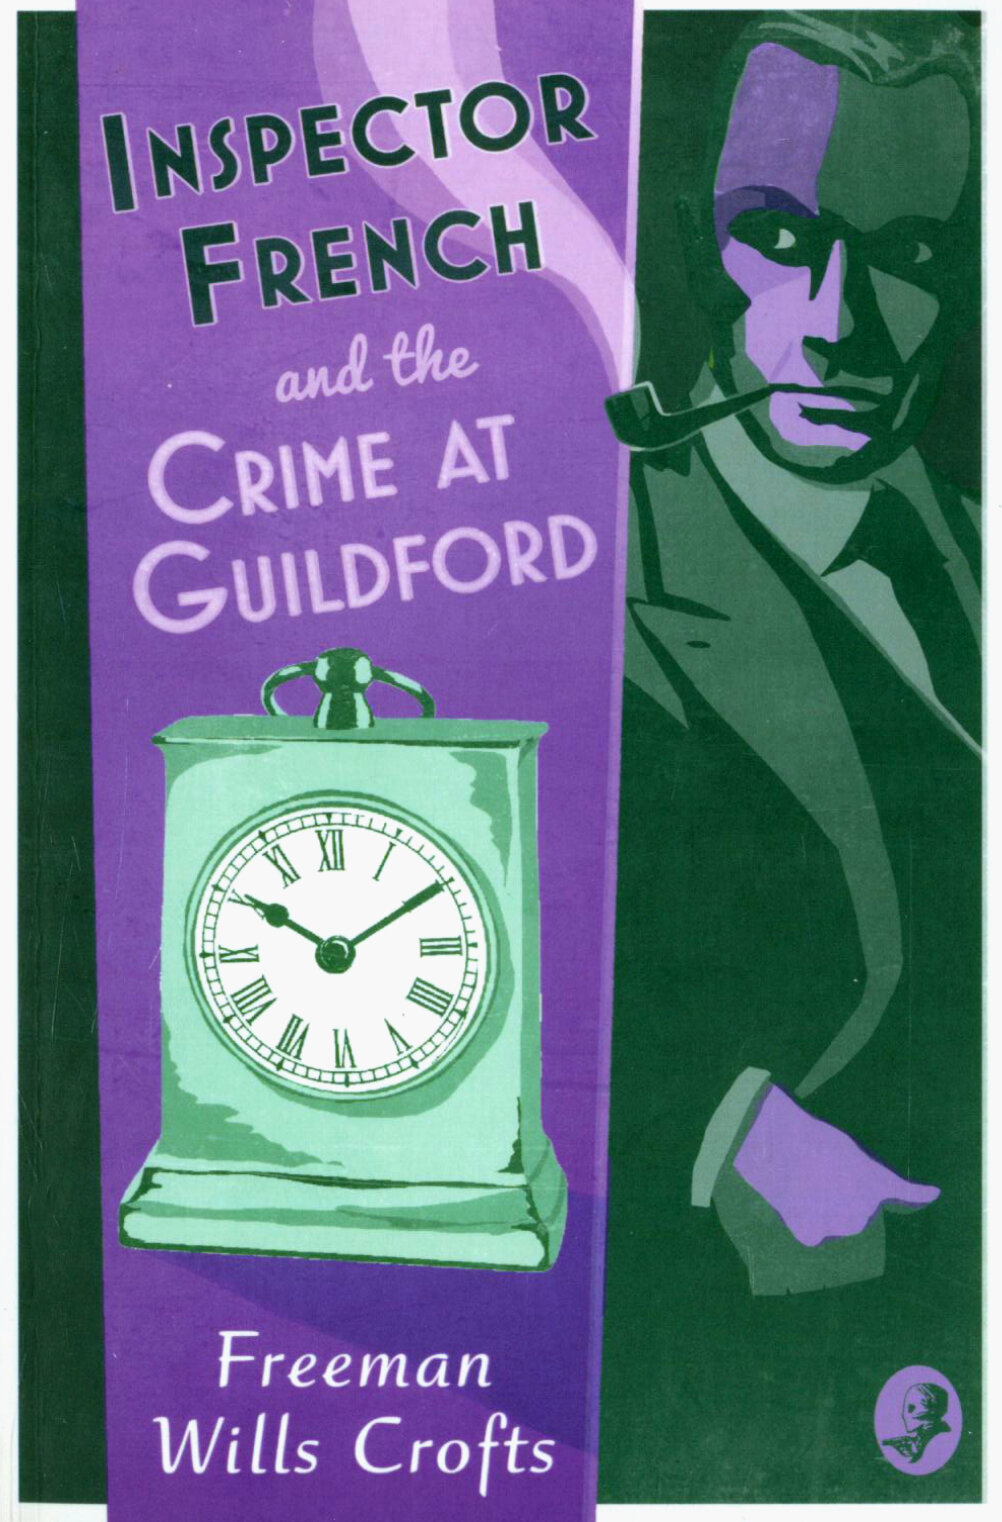 Inspector French and the Crime at Guildford / Wills Crofts Freeman / Книга на Английском / Крофтс Фримен Уиллс - фото №1